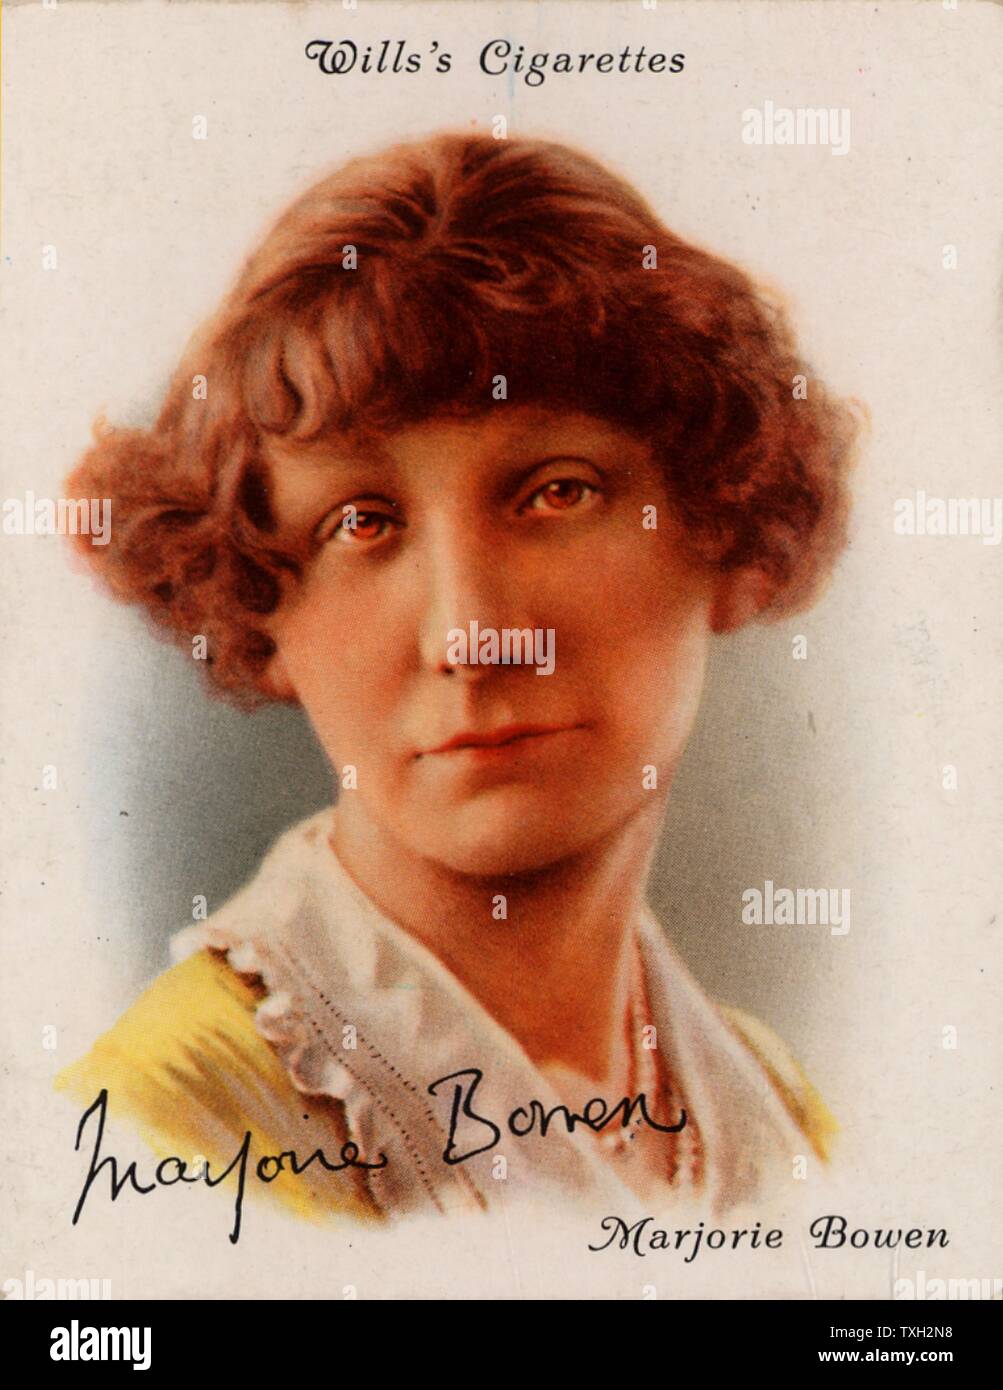 Marjorie Bowen (1885-1952), one of the pseudonyms of Gabrielle Margaret Vere Long, born Campbell.  British novelist, biographer and essayist, writer of historical novels and children's stories.  From a series of cards of 'Famous British Authors' (London, 1937). Stock Photo